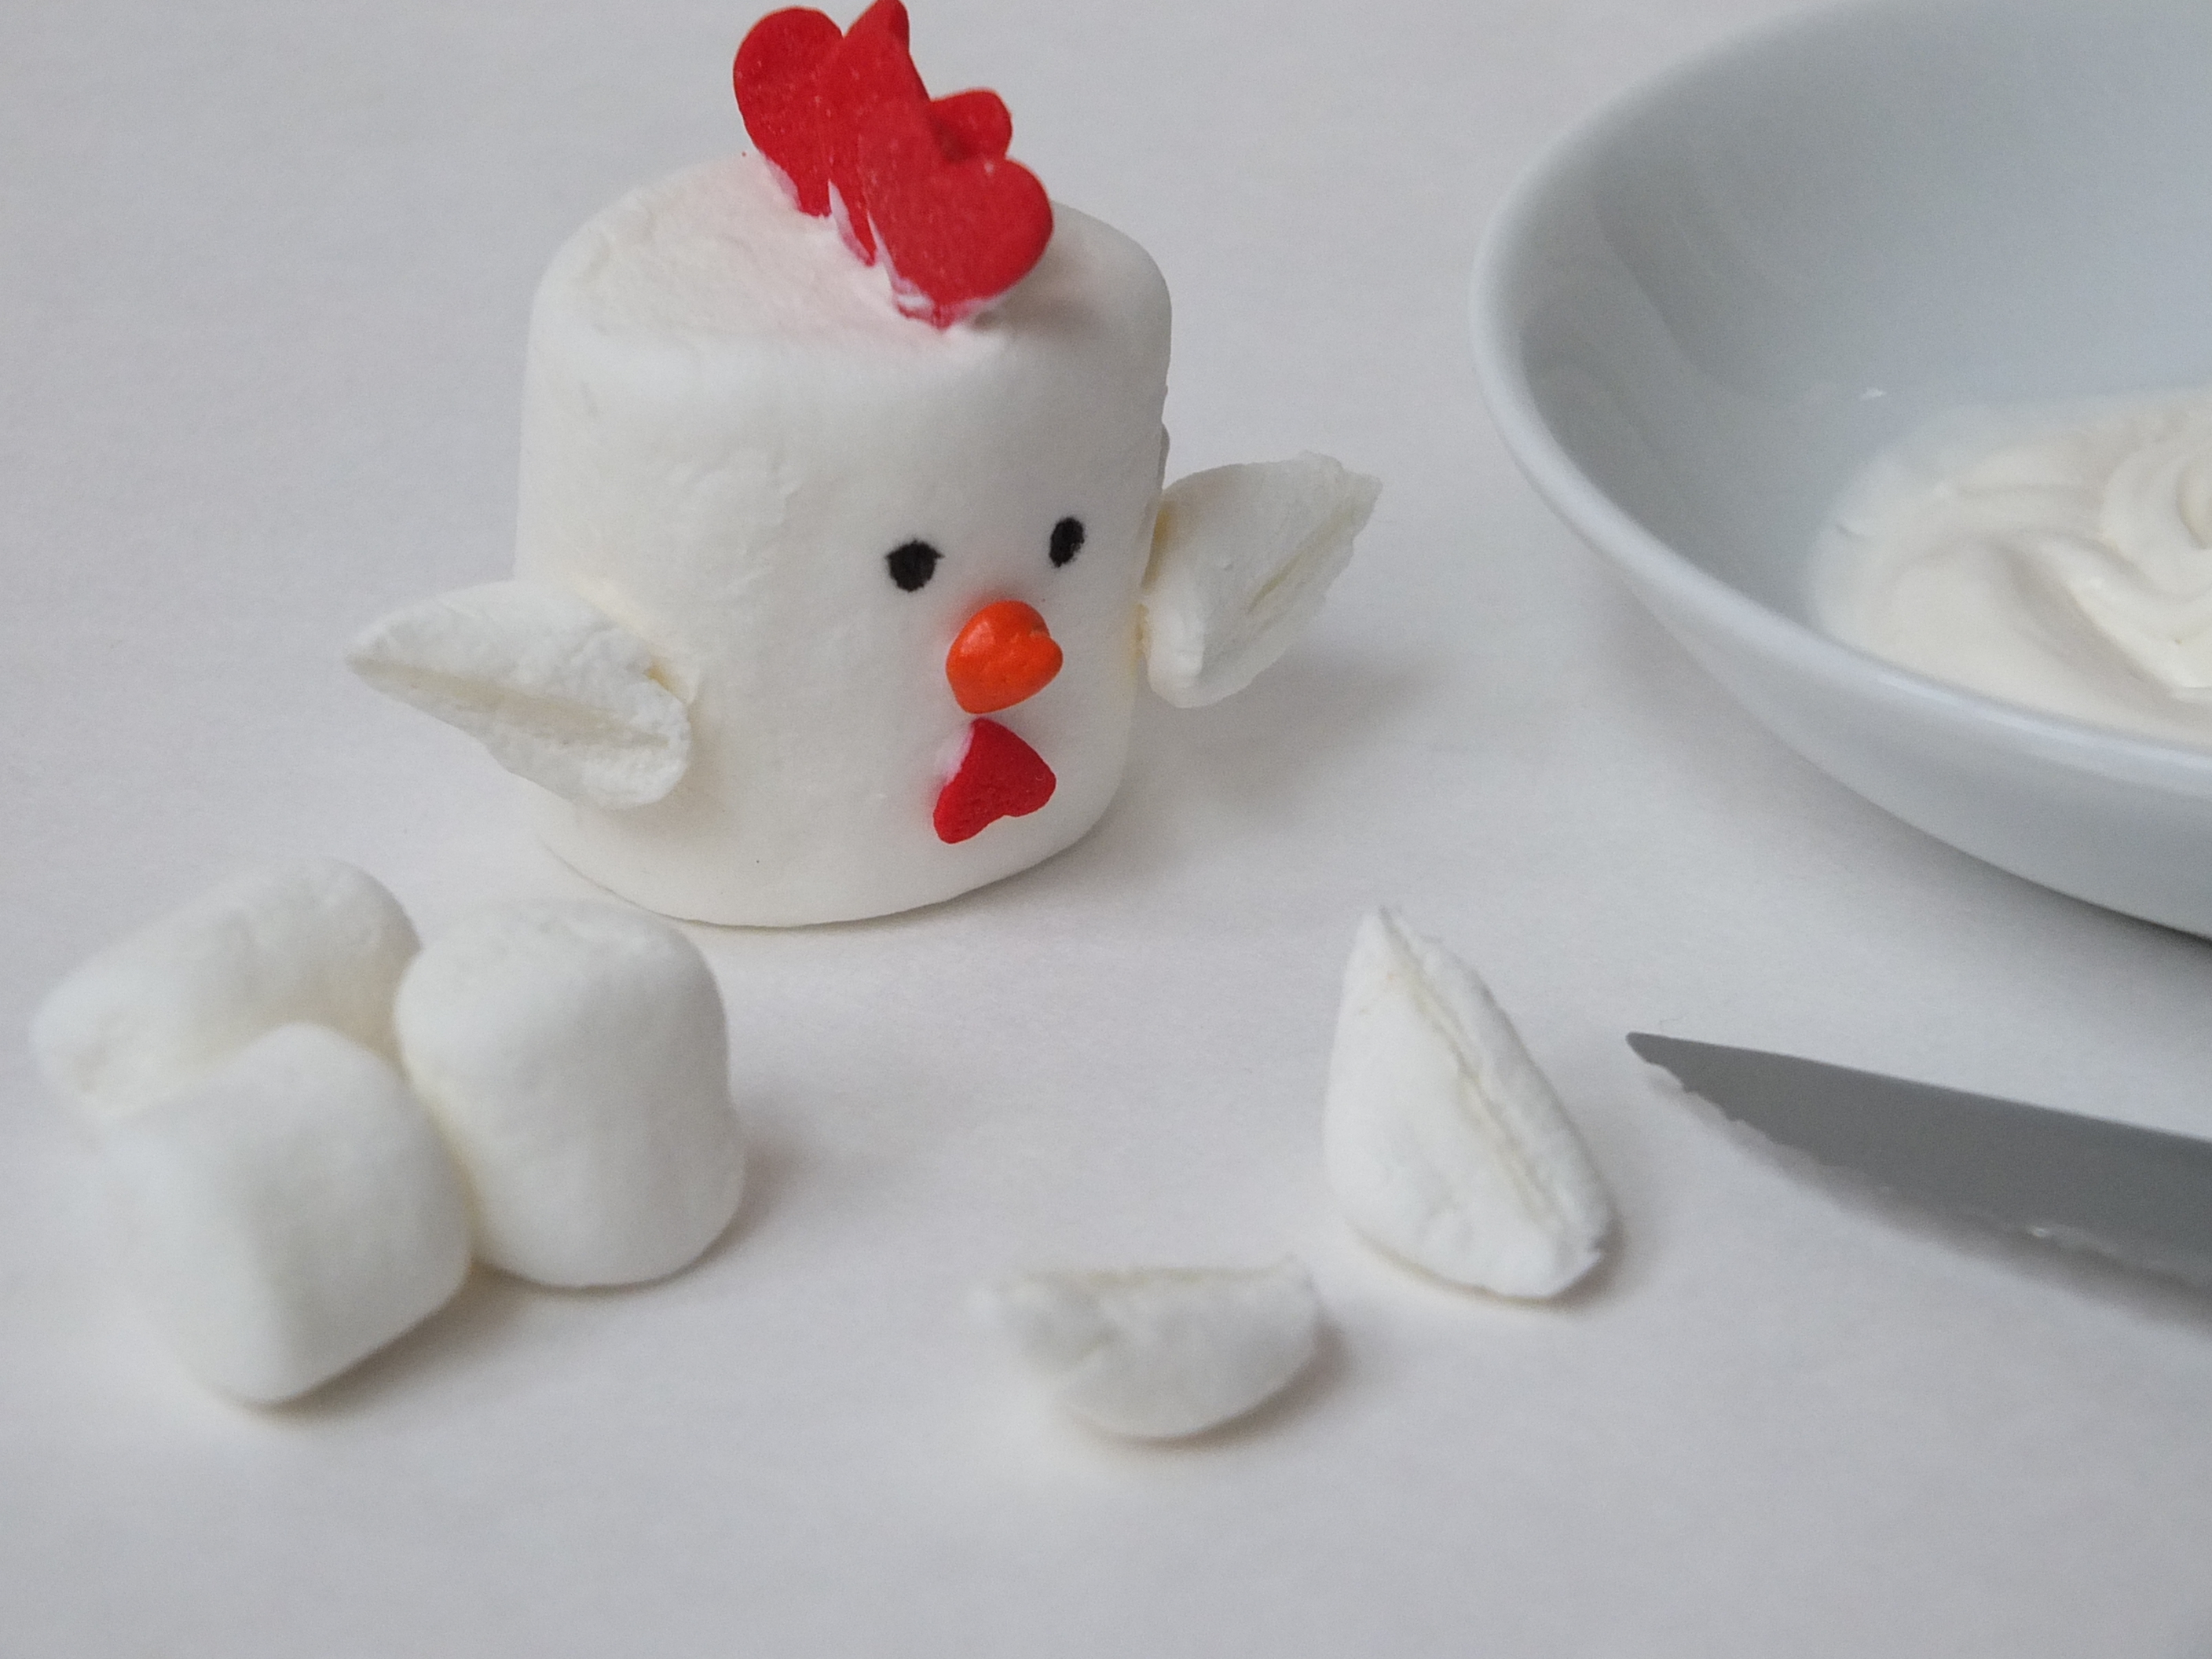 Chinese Lunar New Year Rooster Marshmallows easy dessert ideas kids